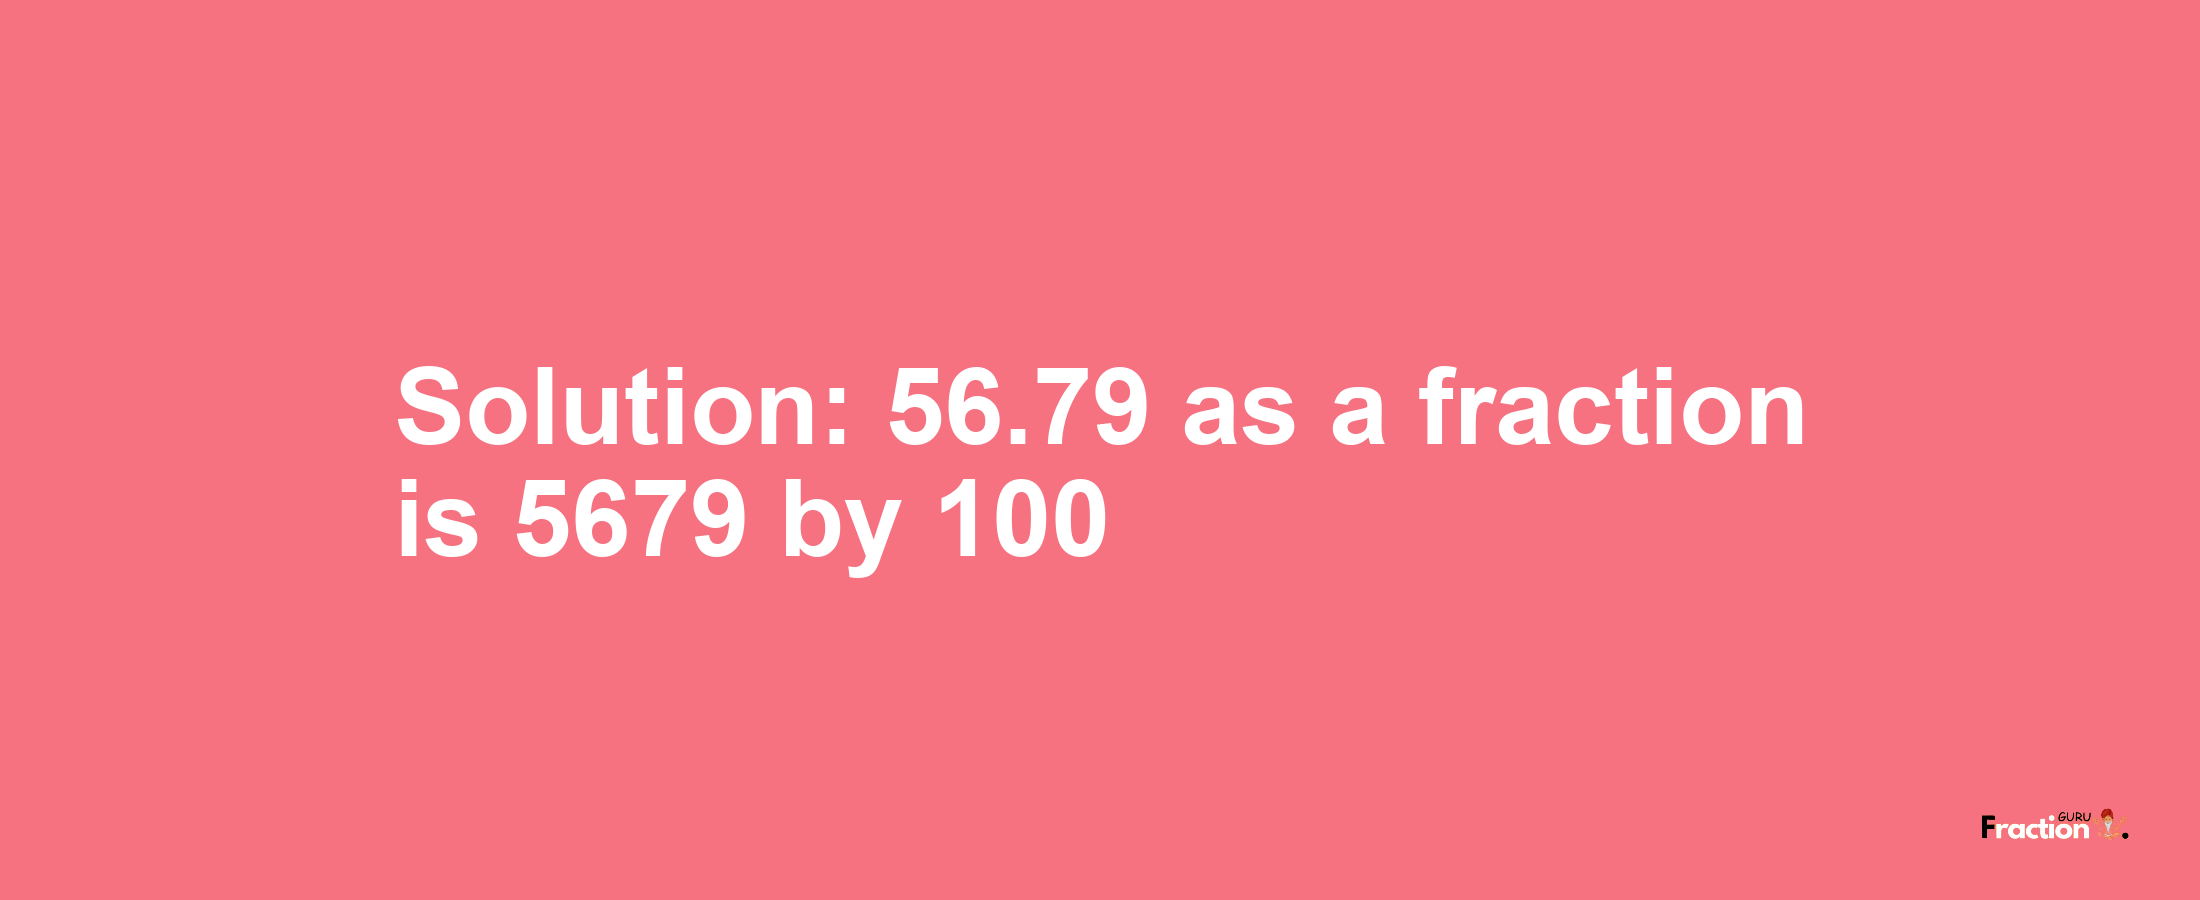 Solution:56.79 as a fraction is 5679/100